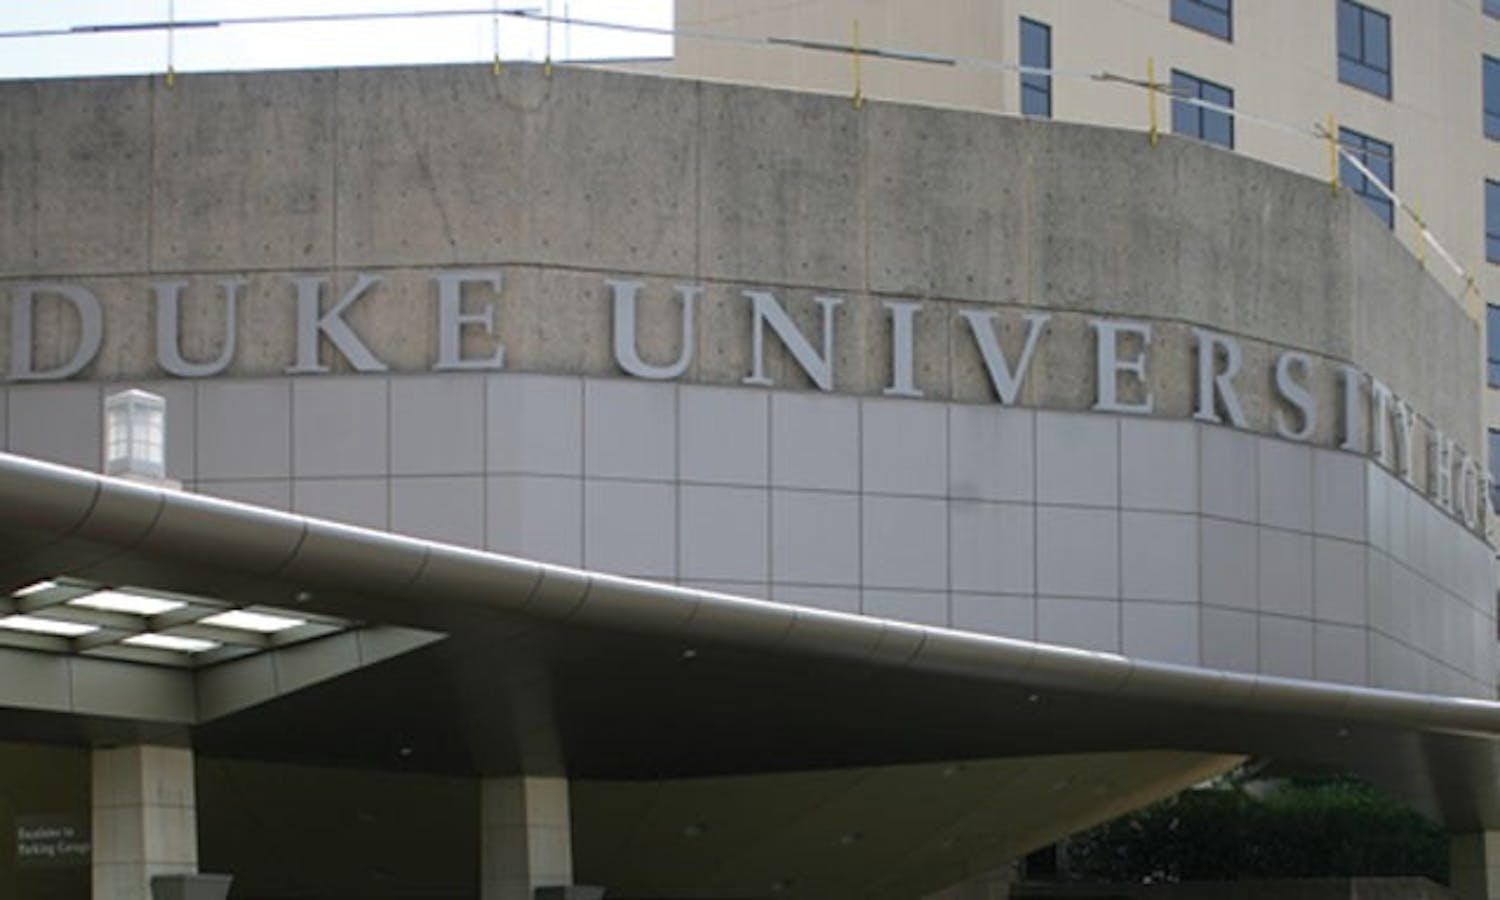 Officials confirmed that the State Bureau of Investigation and Duke University Police Department will lead the investigation on the shooting that occurred outside the hospital’s entrance early Saturday morning.